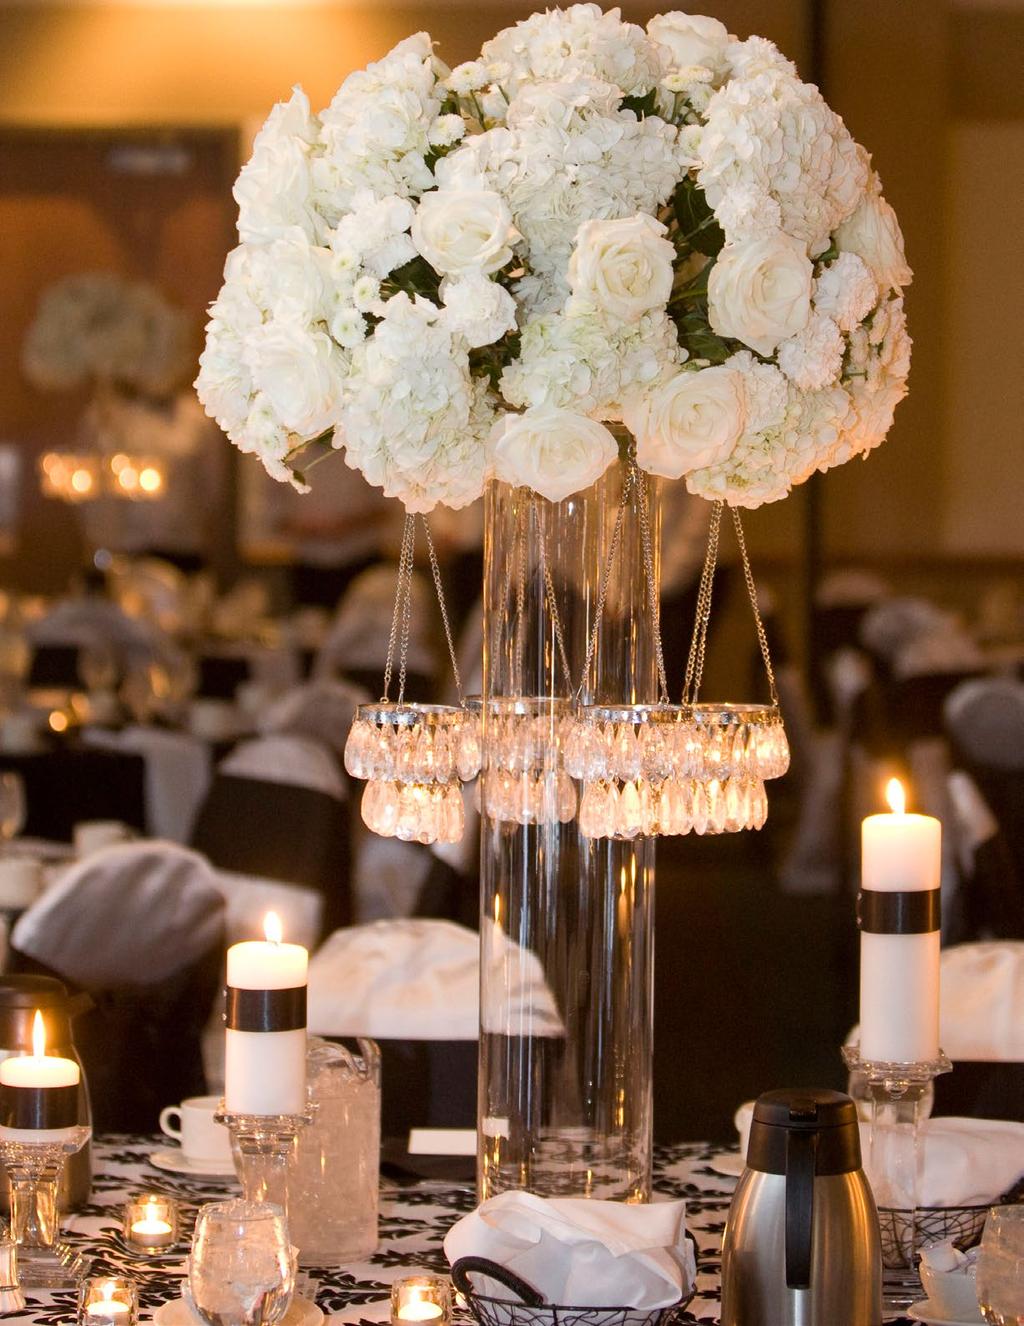 Wedding Reception Pricing Make your wedding an affair to remember.